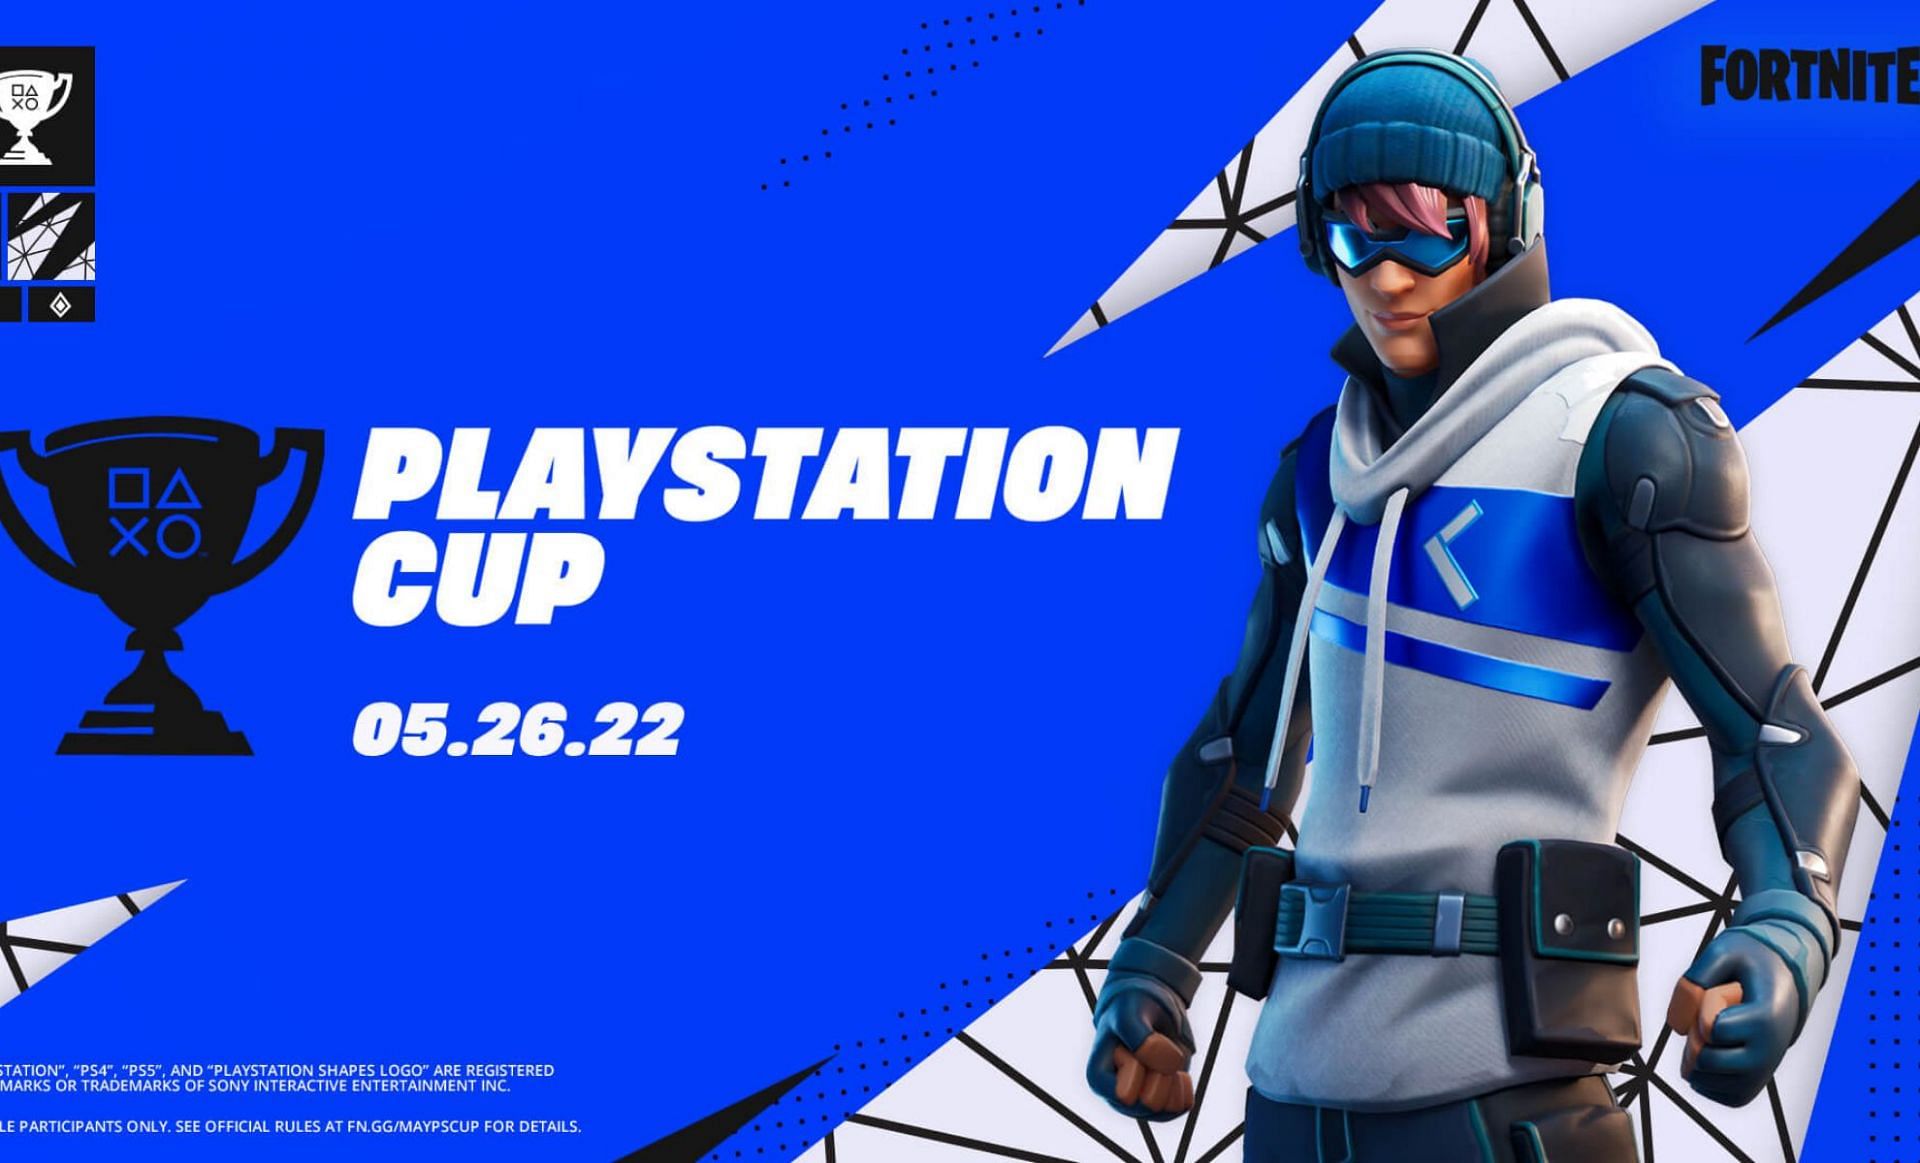 Fortnite Playstation Cup Start Date, How to redeem free rewards, and more